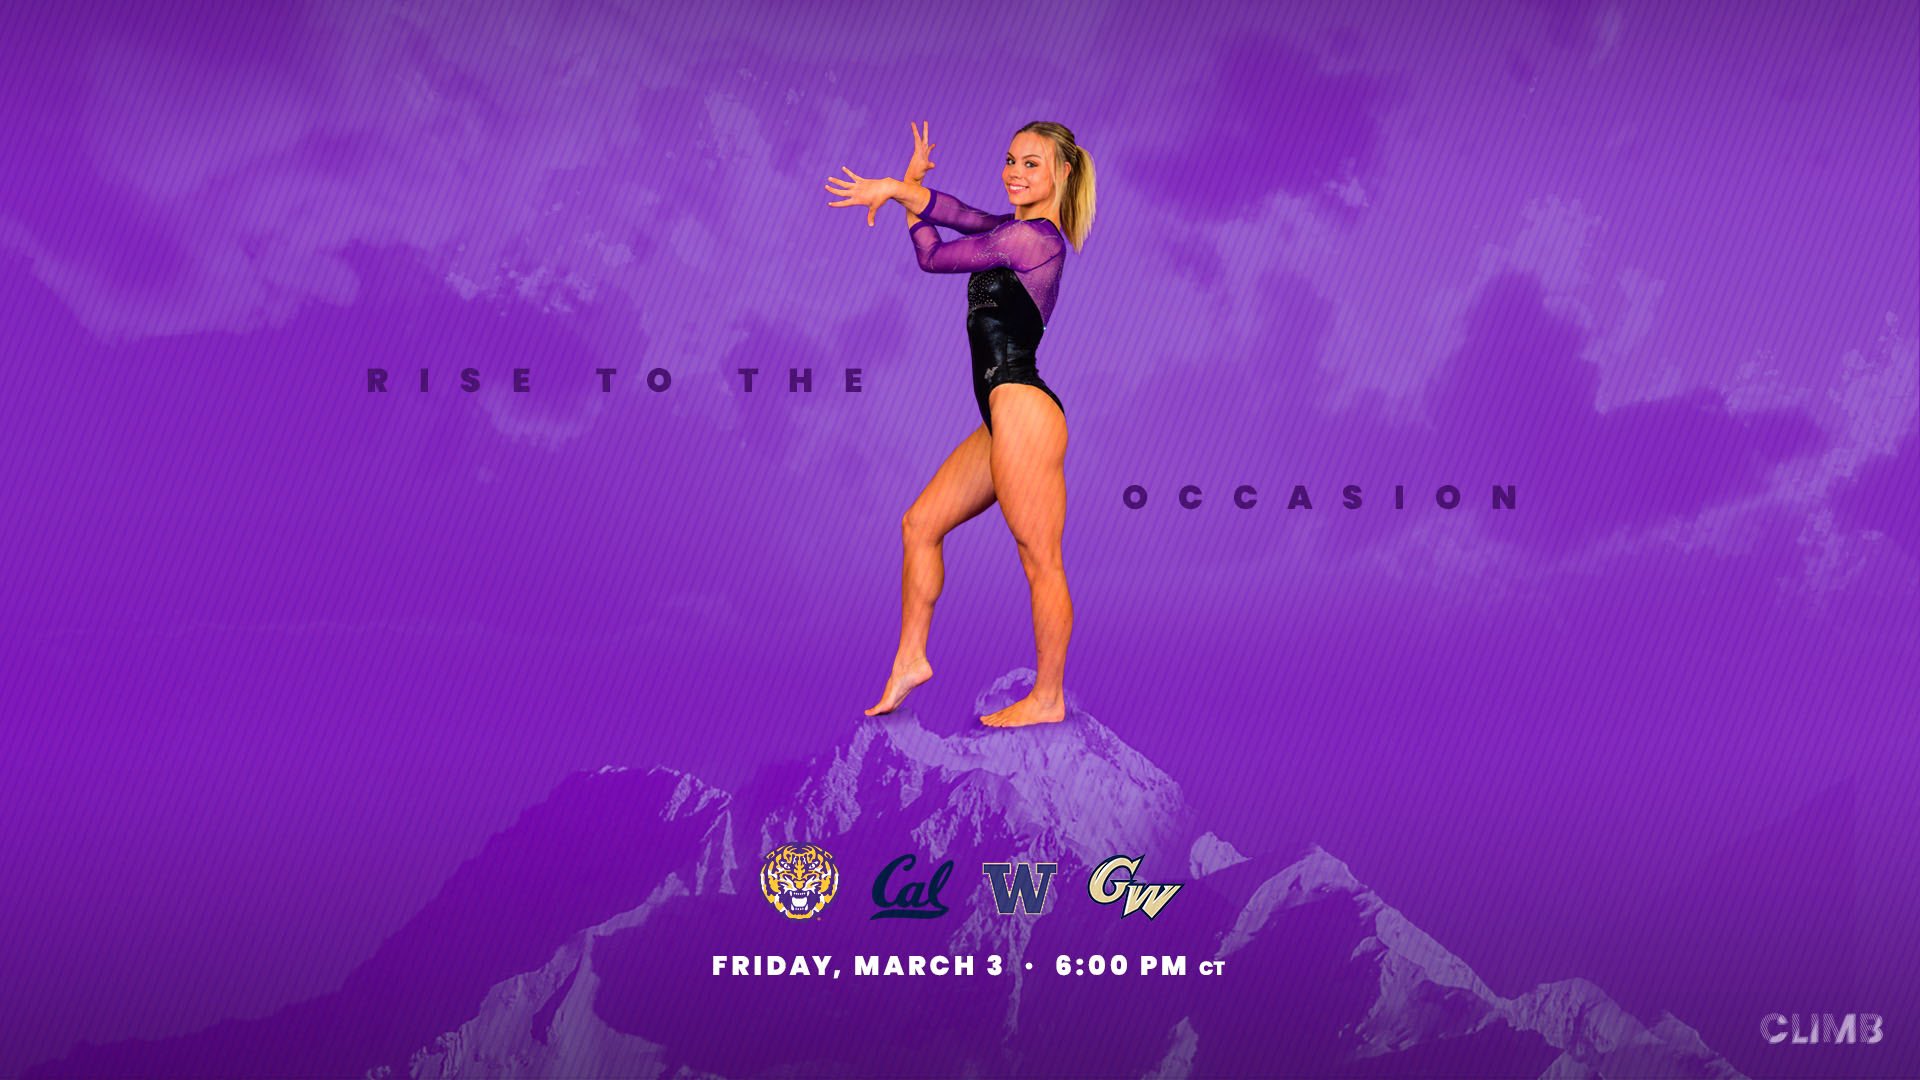 LSU gymnast Chase Brock stands on a purple background wearing a black and purple competition leotard facing the left with her head facing the viewer. Black text around her reads “Rise to the occasion.” Below her are the logos for LSU, Cal, Washington and George Washington. Below them is white text reading “Friday, March 3; 6:00 PM CT.”